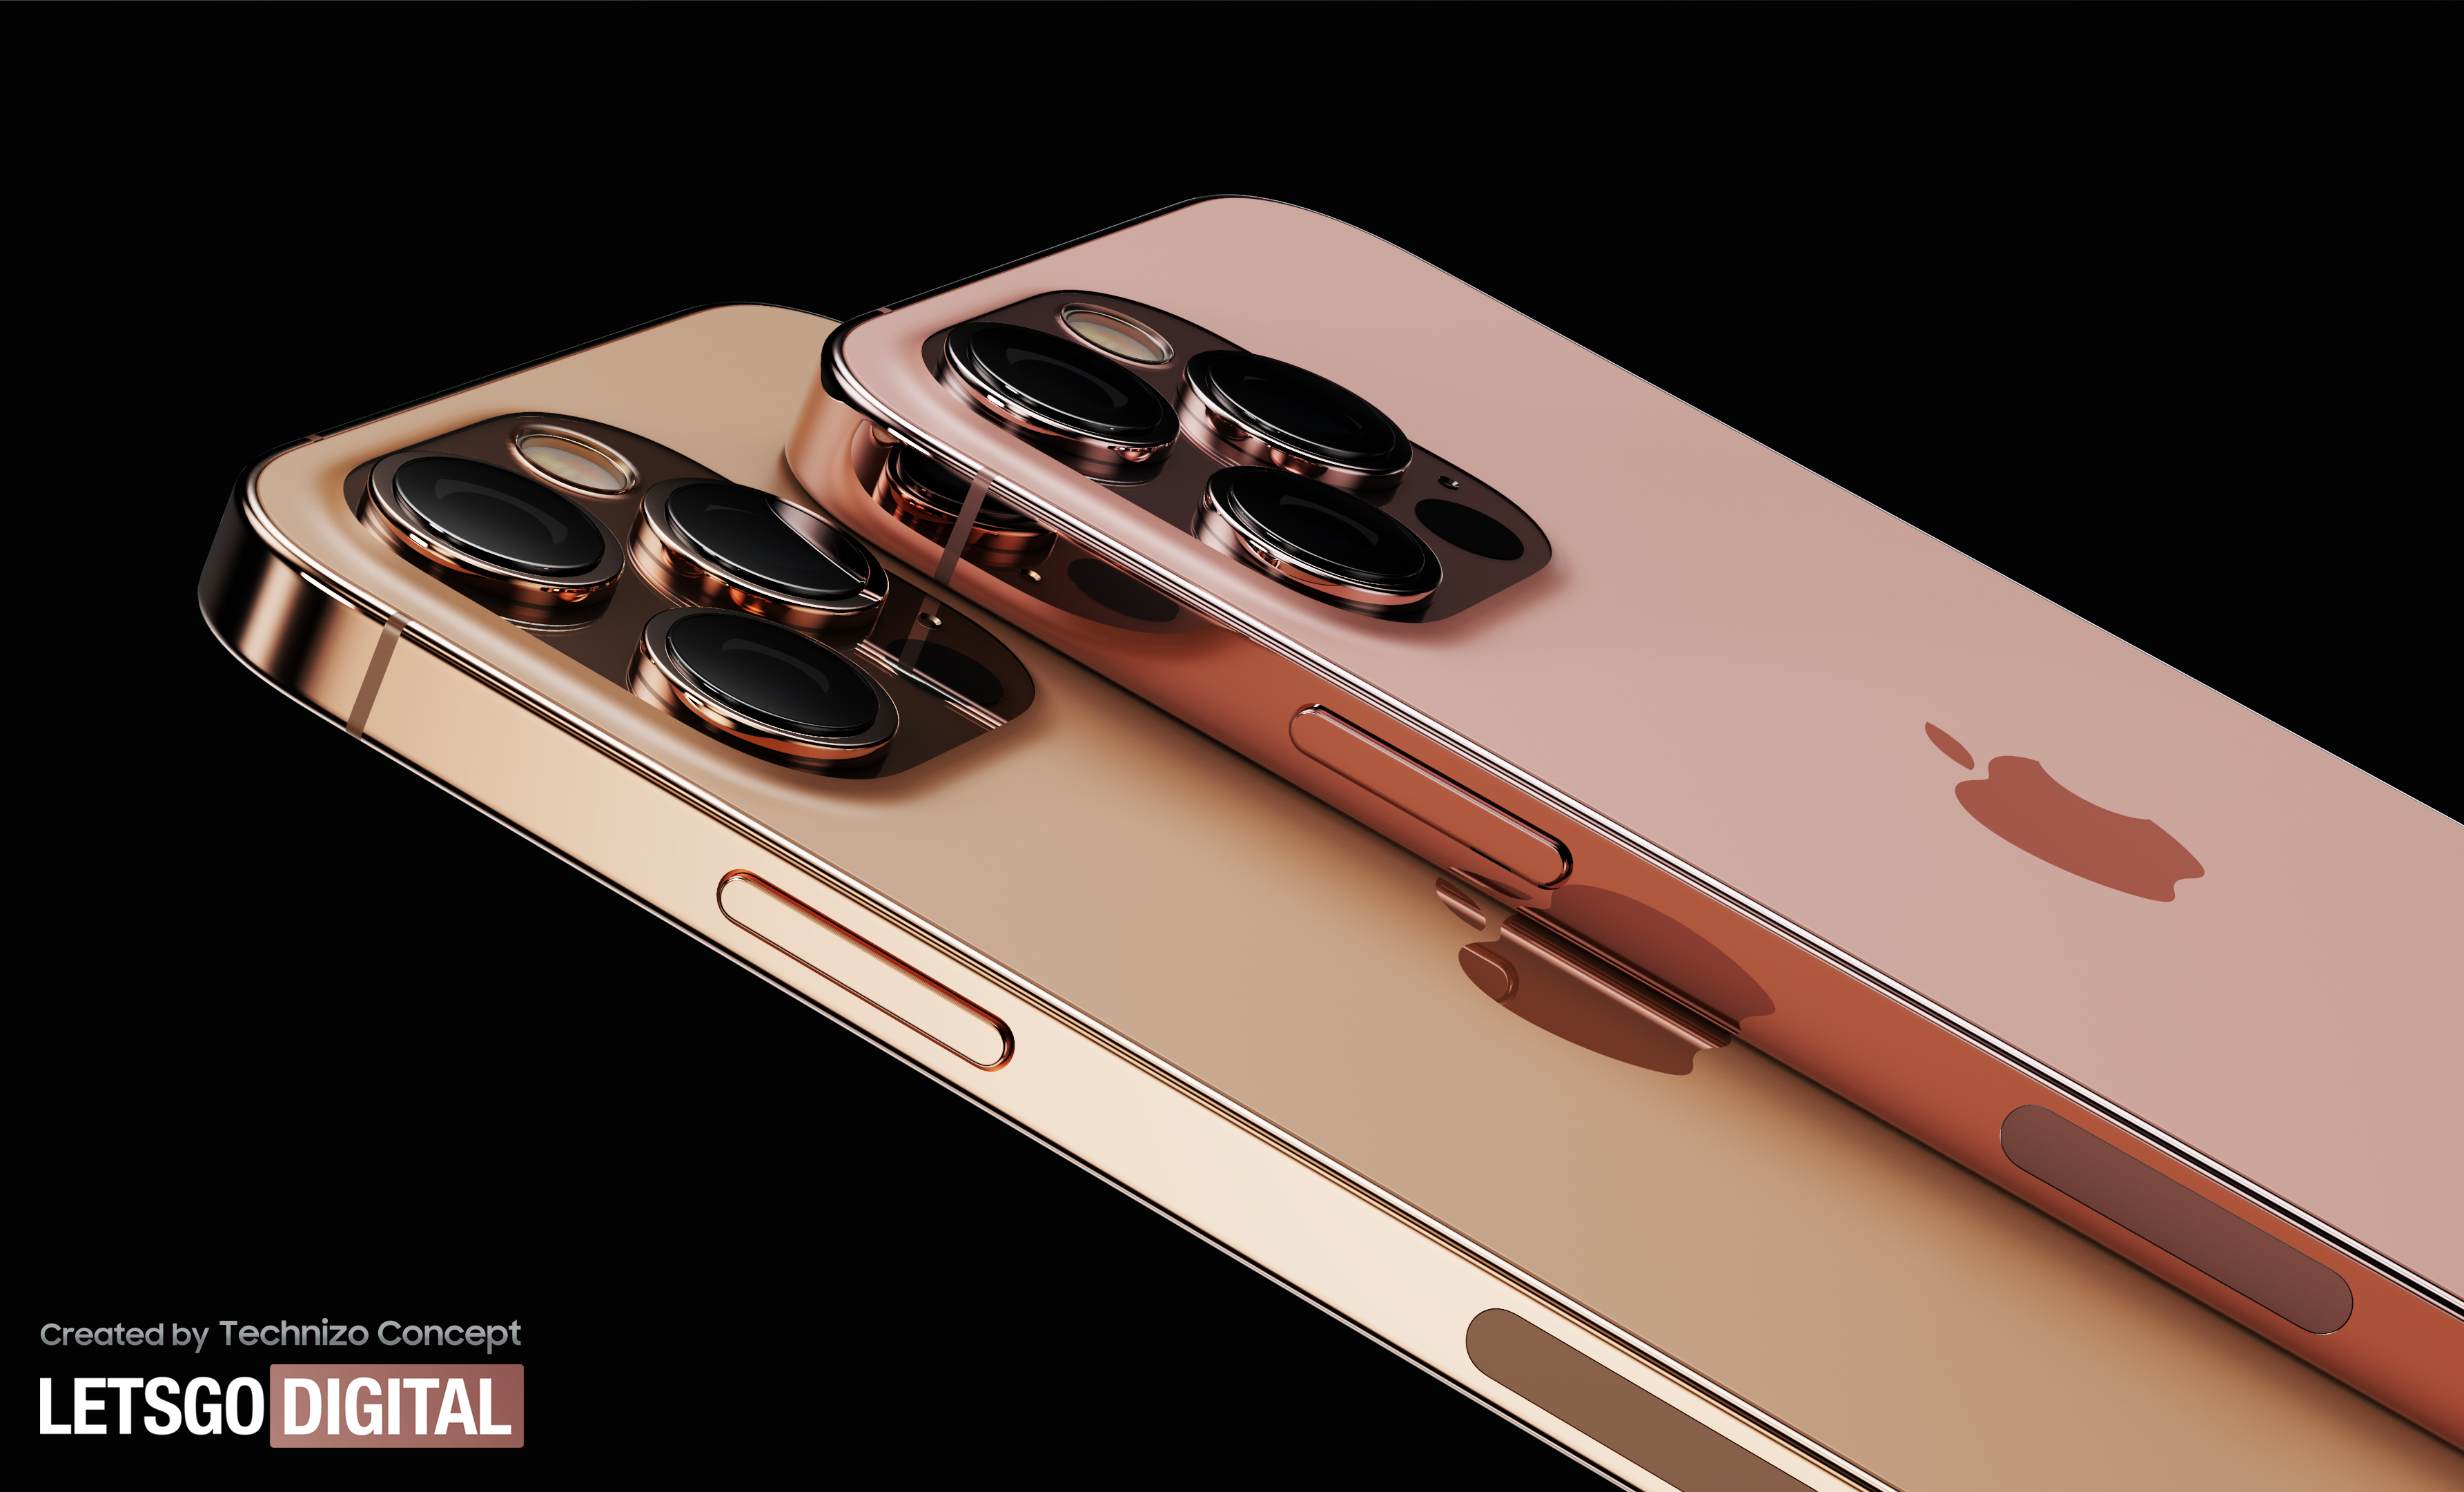 Iphone 12s Pro In Two New Colors Sunset Gold And Rose Gold Letsgodigital